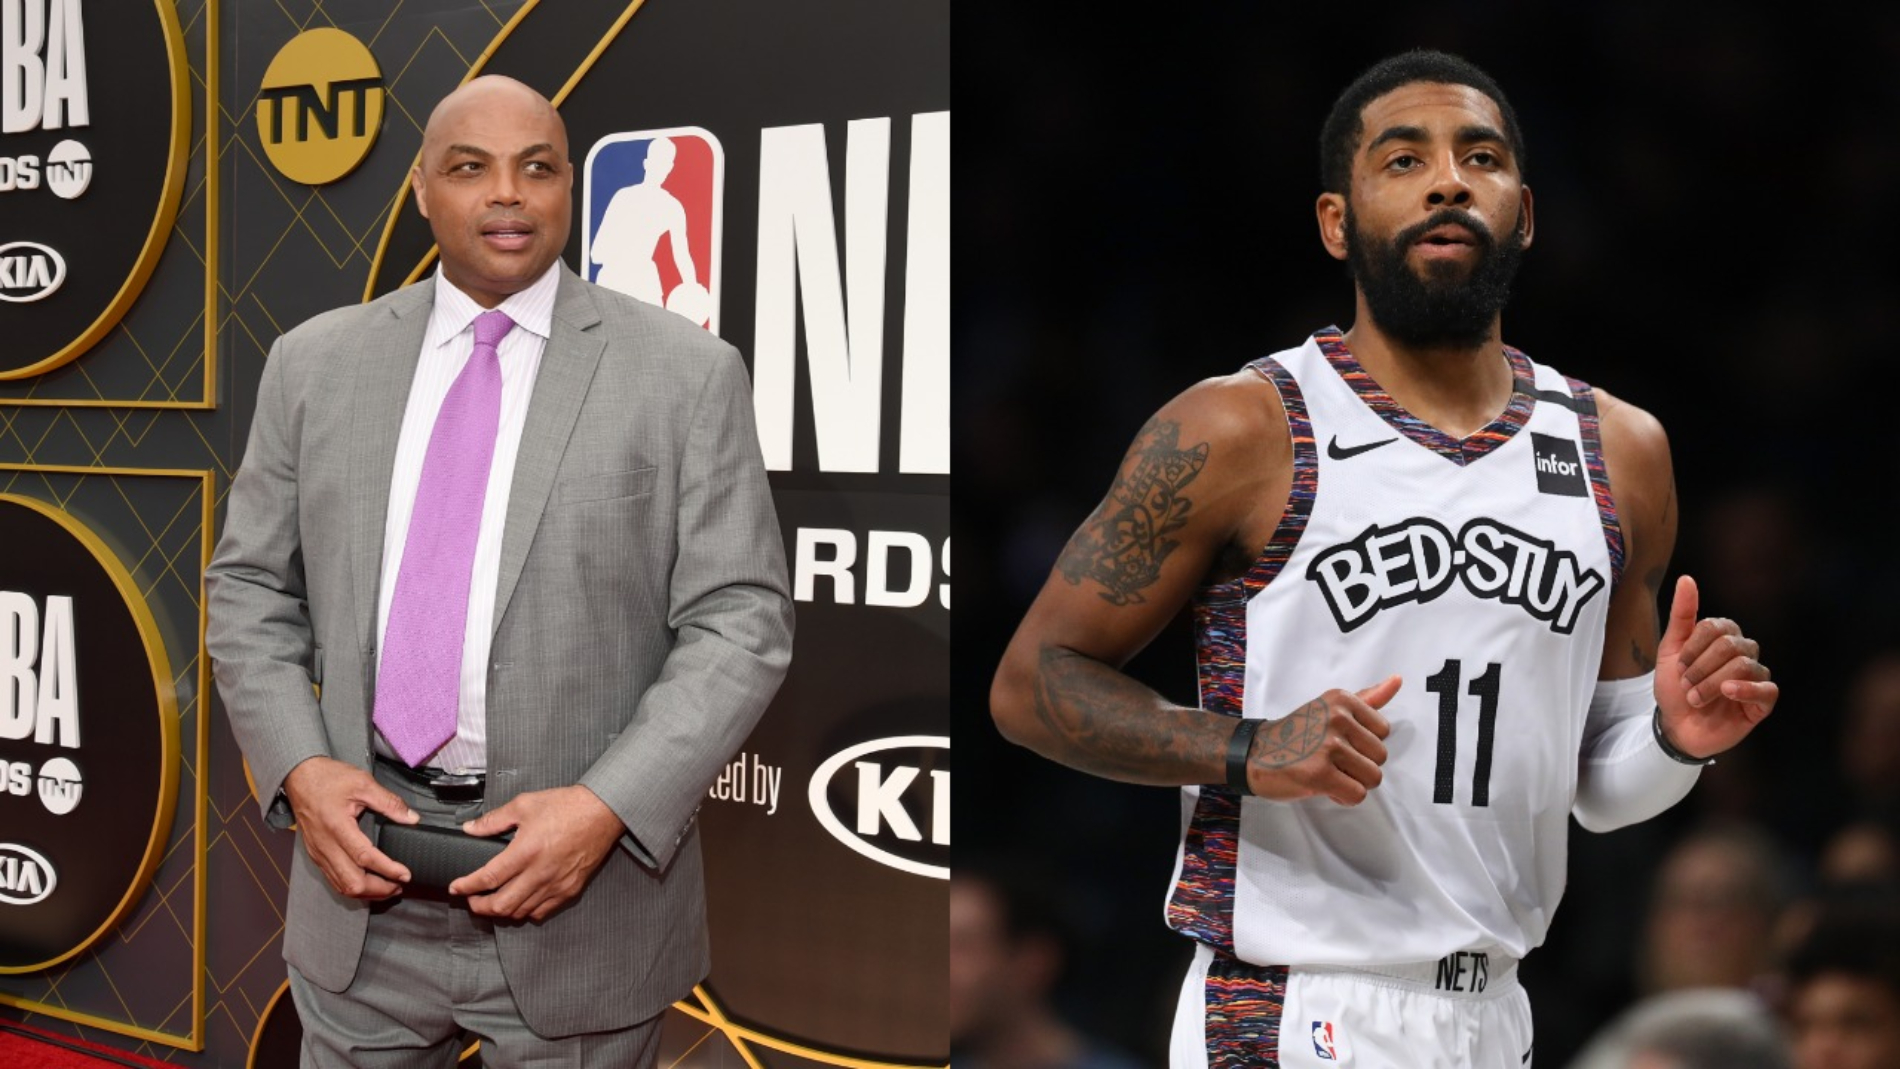 Kyrie Irving has been making headlines recently with his unwillingness to speak to the media. Charles Barkley appears to be fed up with him.